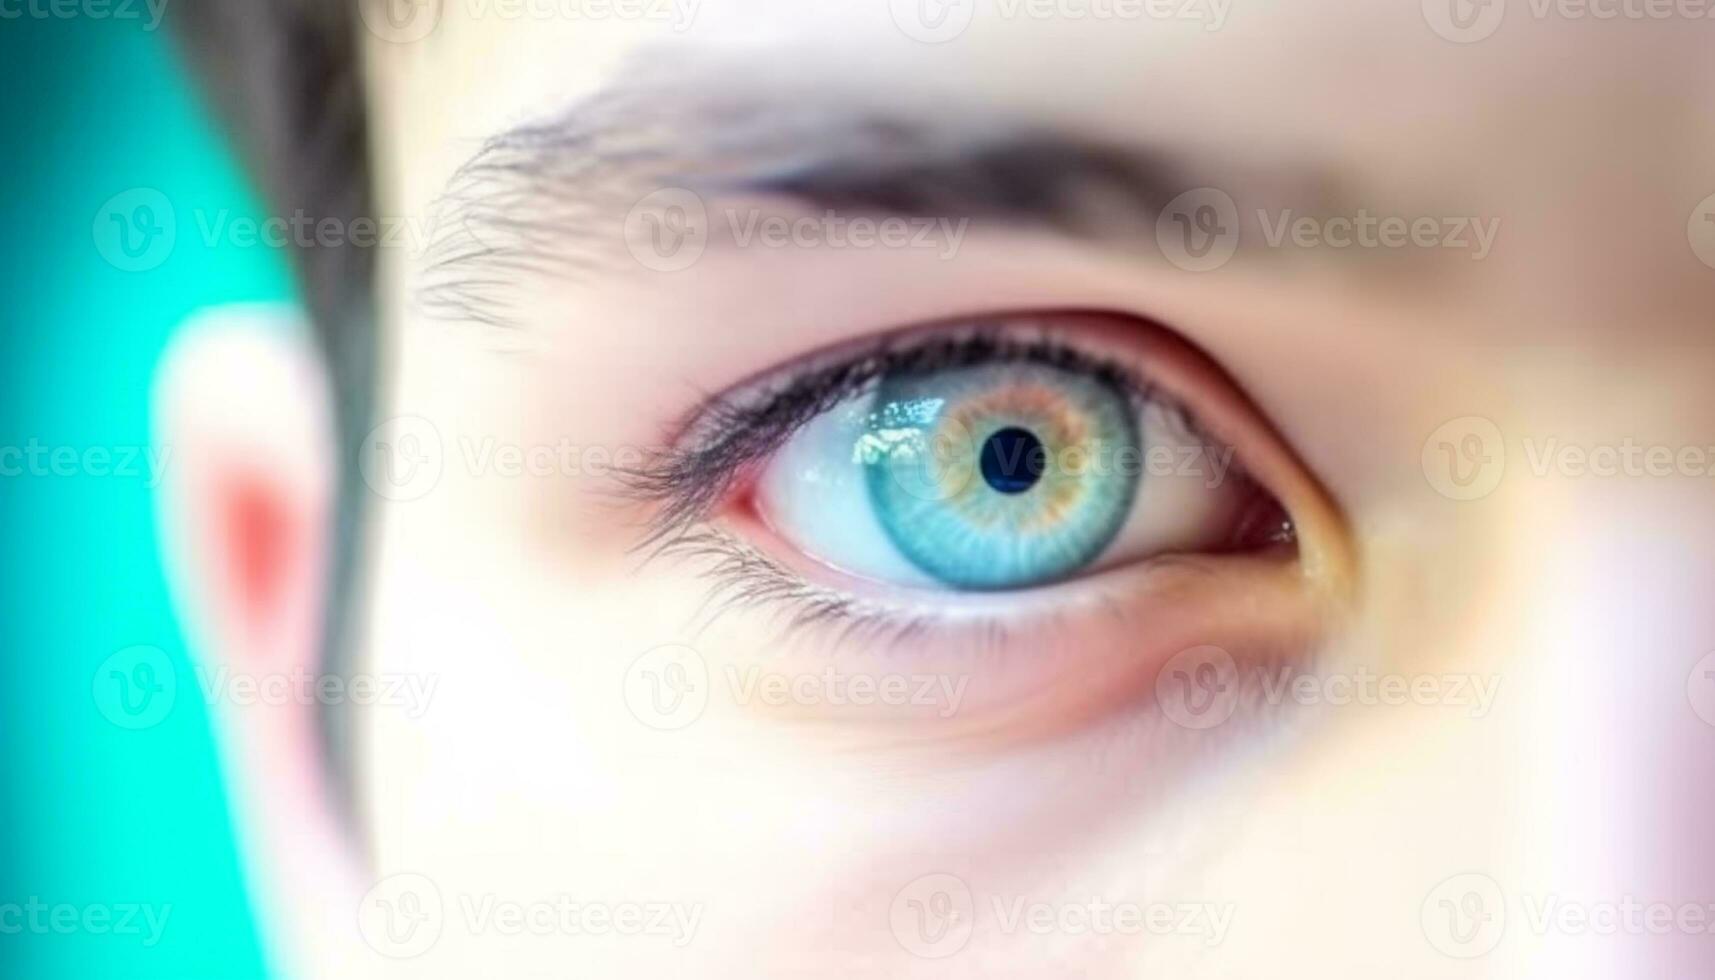 Blue eyed child staring at camera with innocence and beauty generated by AI photo